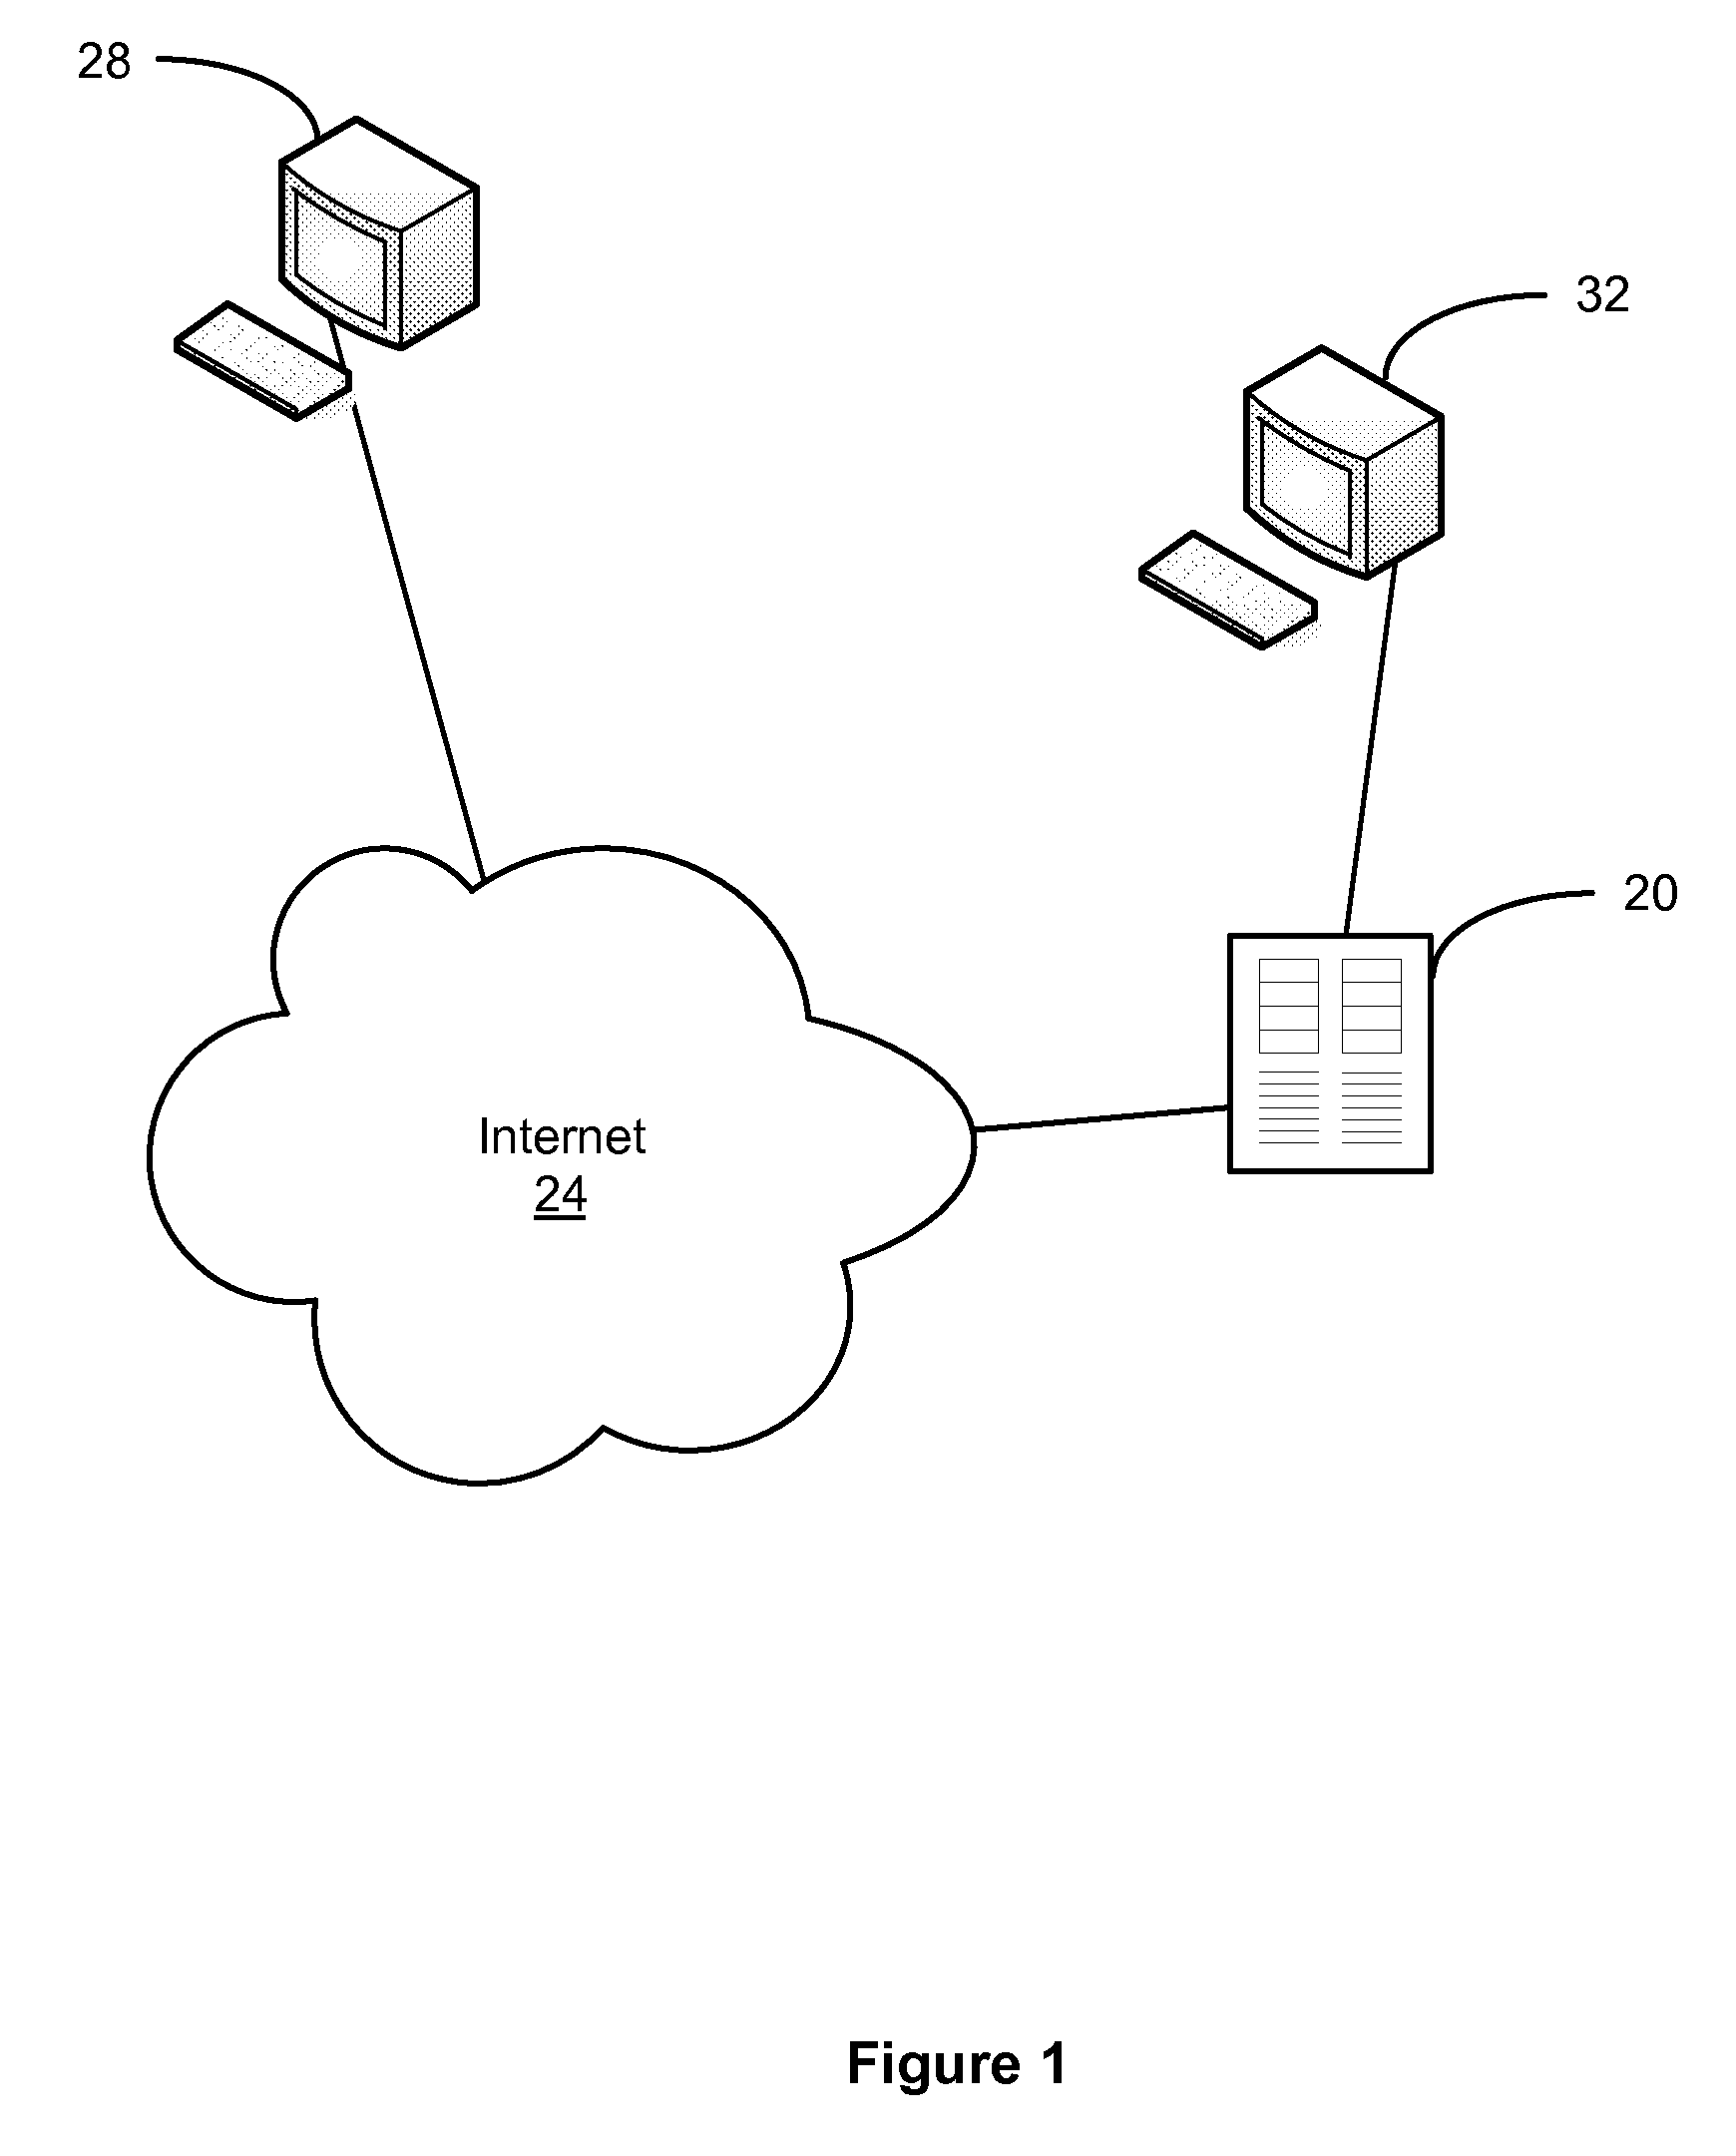 System and Method for Enabling Financial Planning